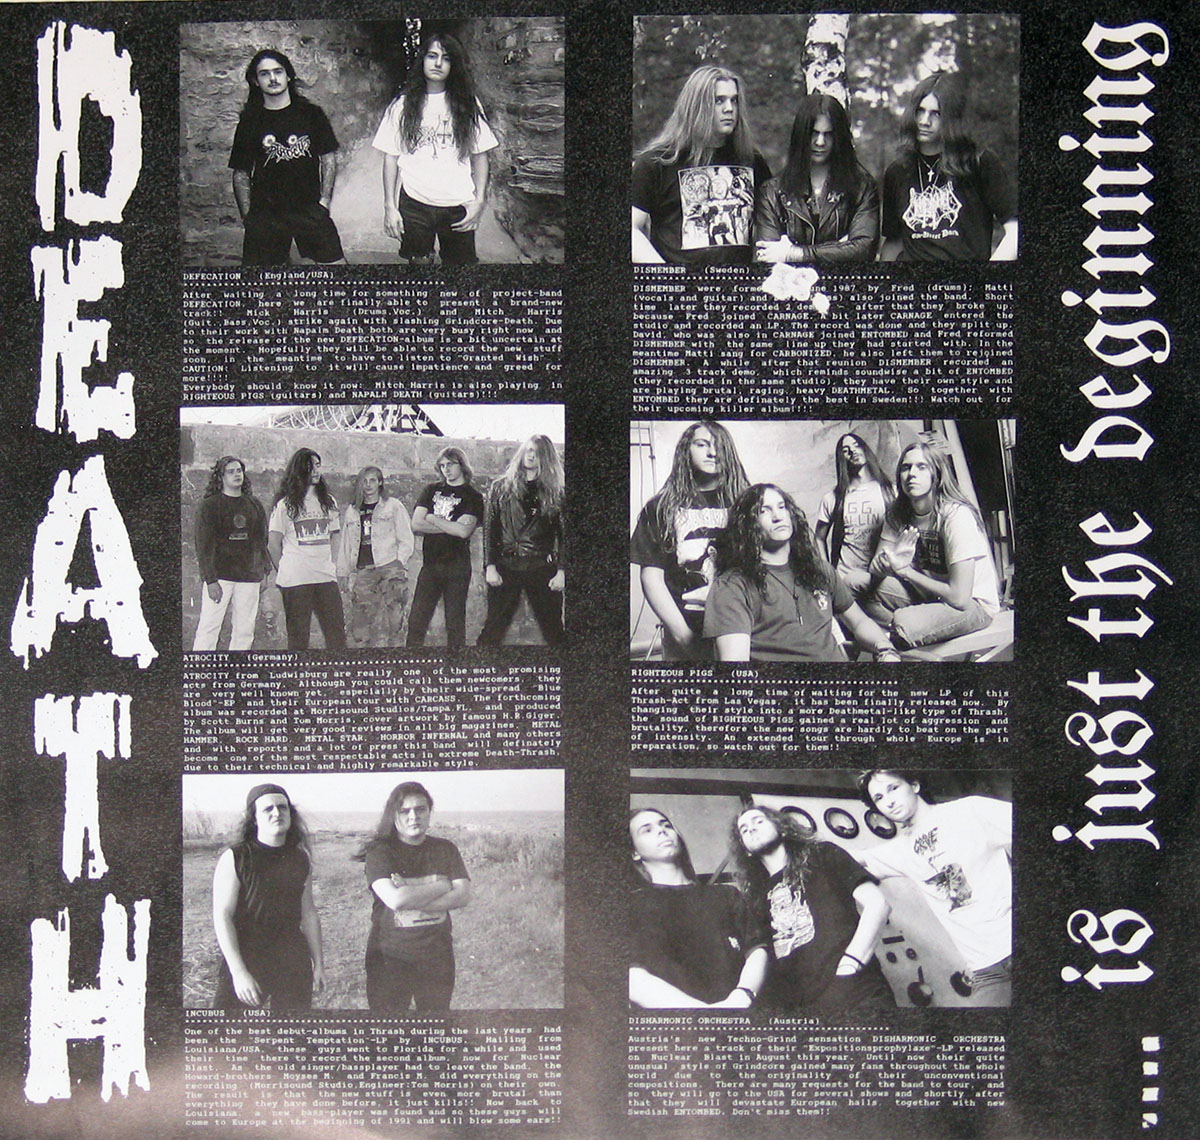 High Resolution Photo DEATH Is Just the Beginning Vinyl Record